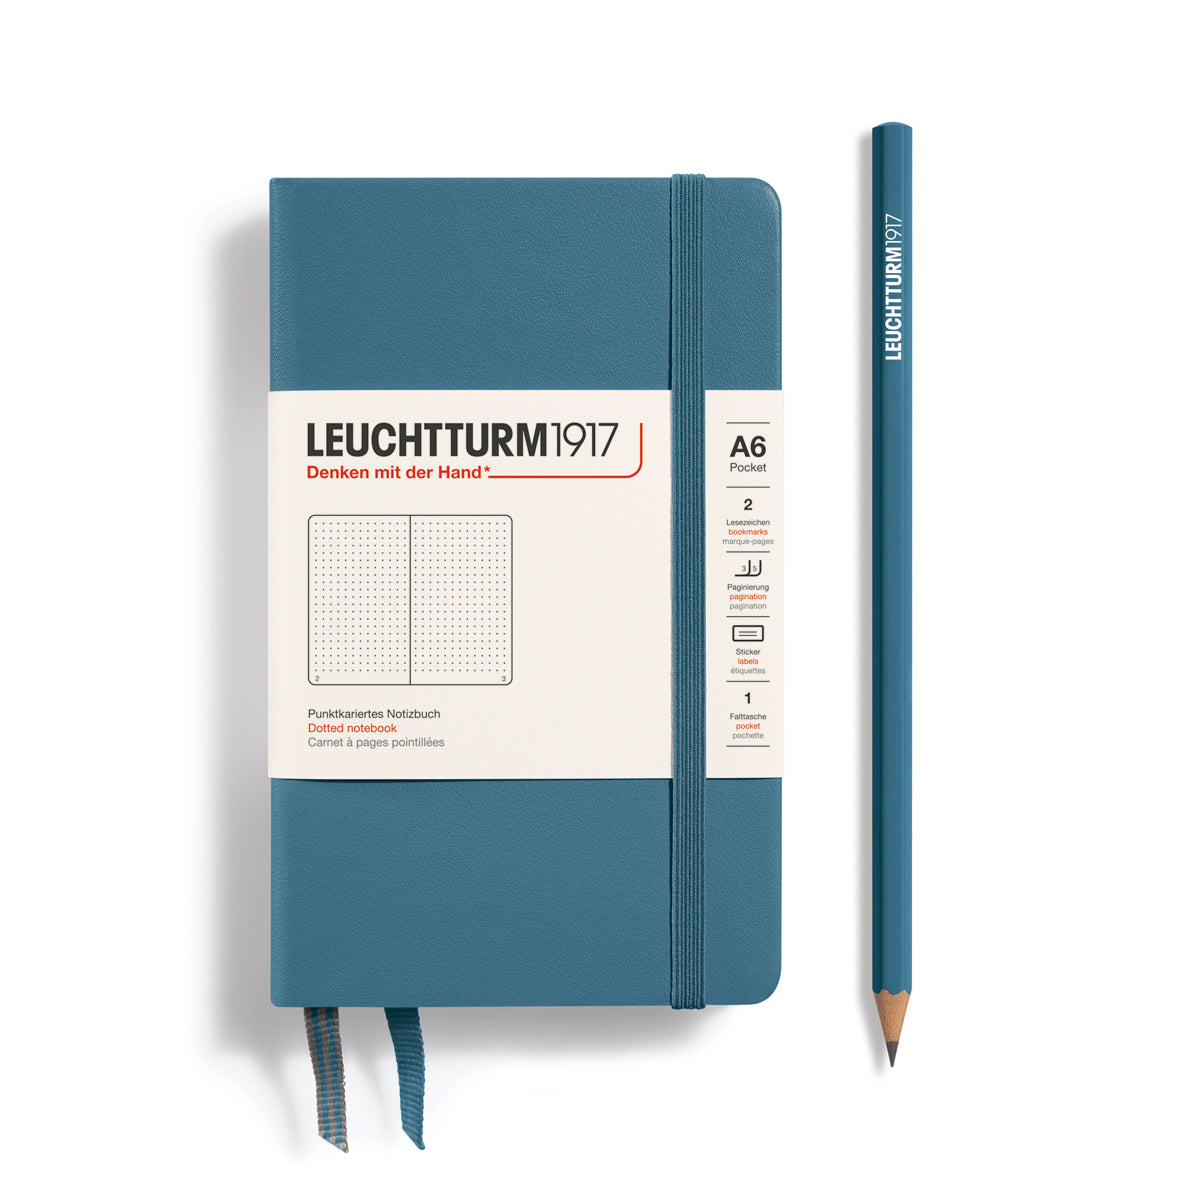 Leuchtturm1917 Notebook A6 Pocket Hardcover in stone blue and dotted ruling from penny black